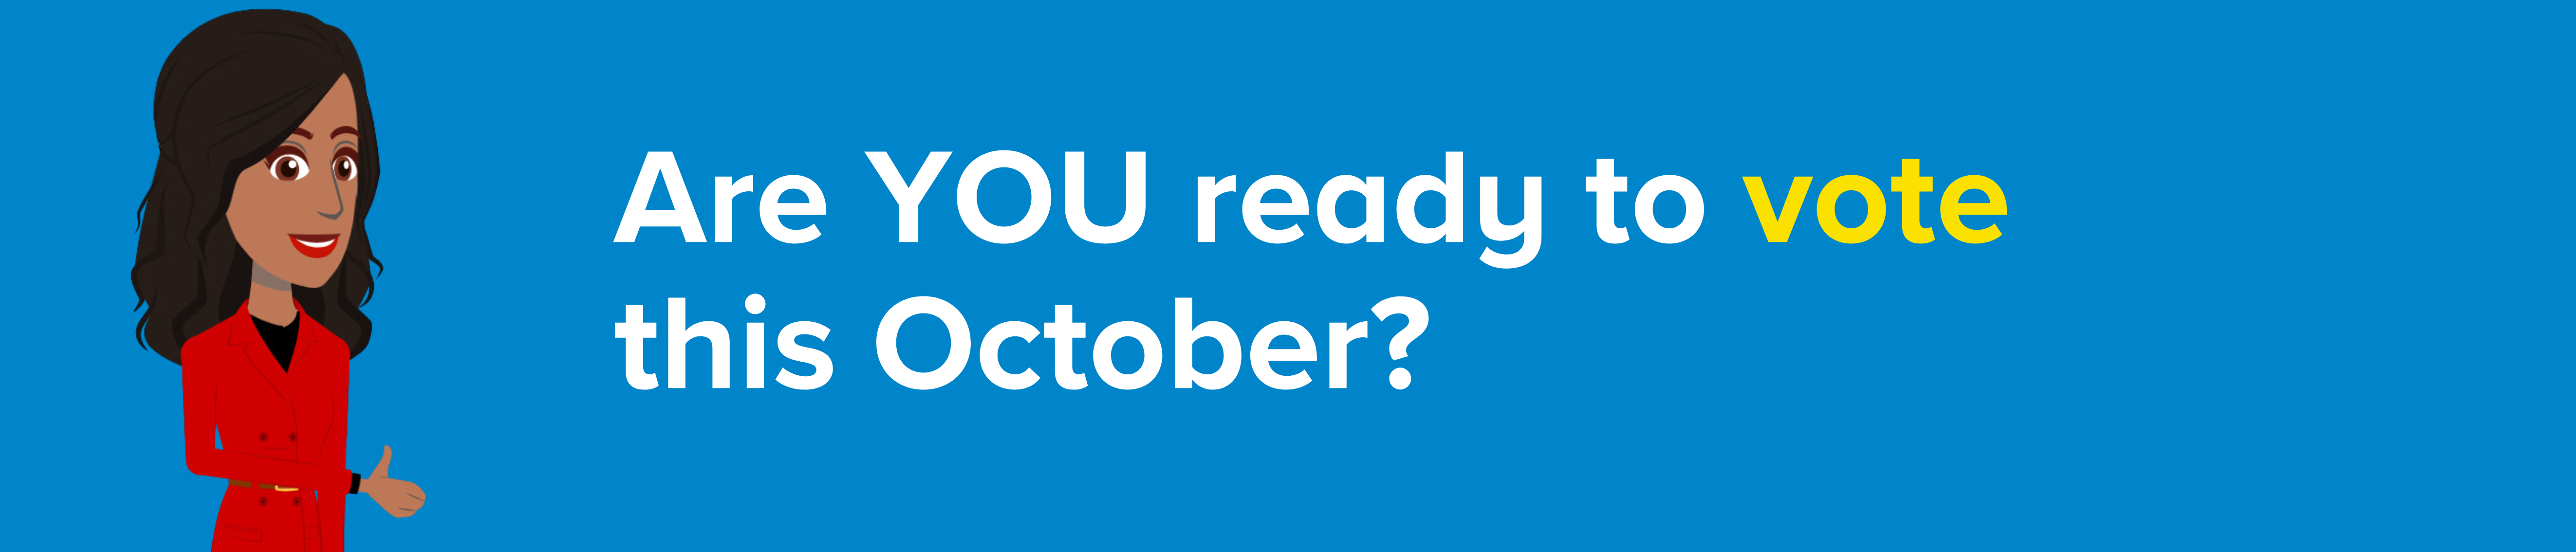 Are you ready to vote this October?